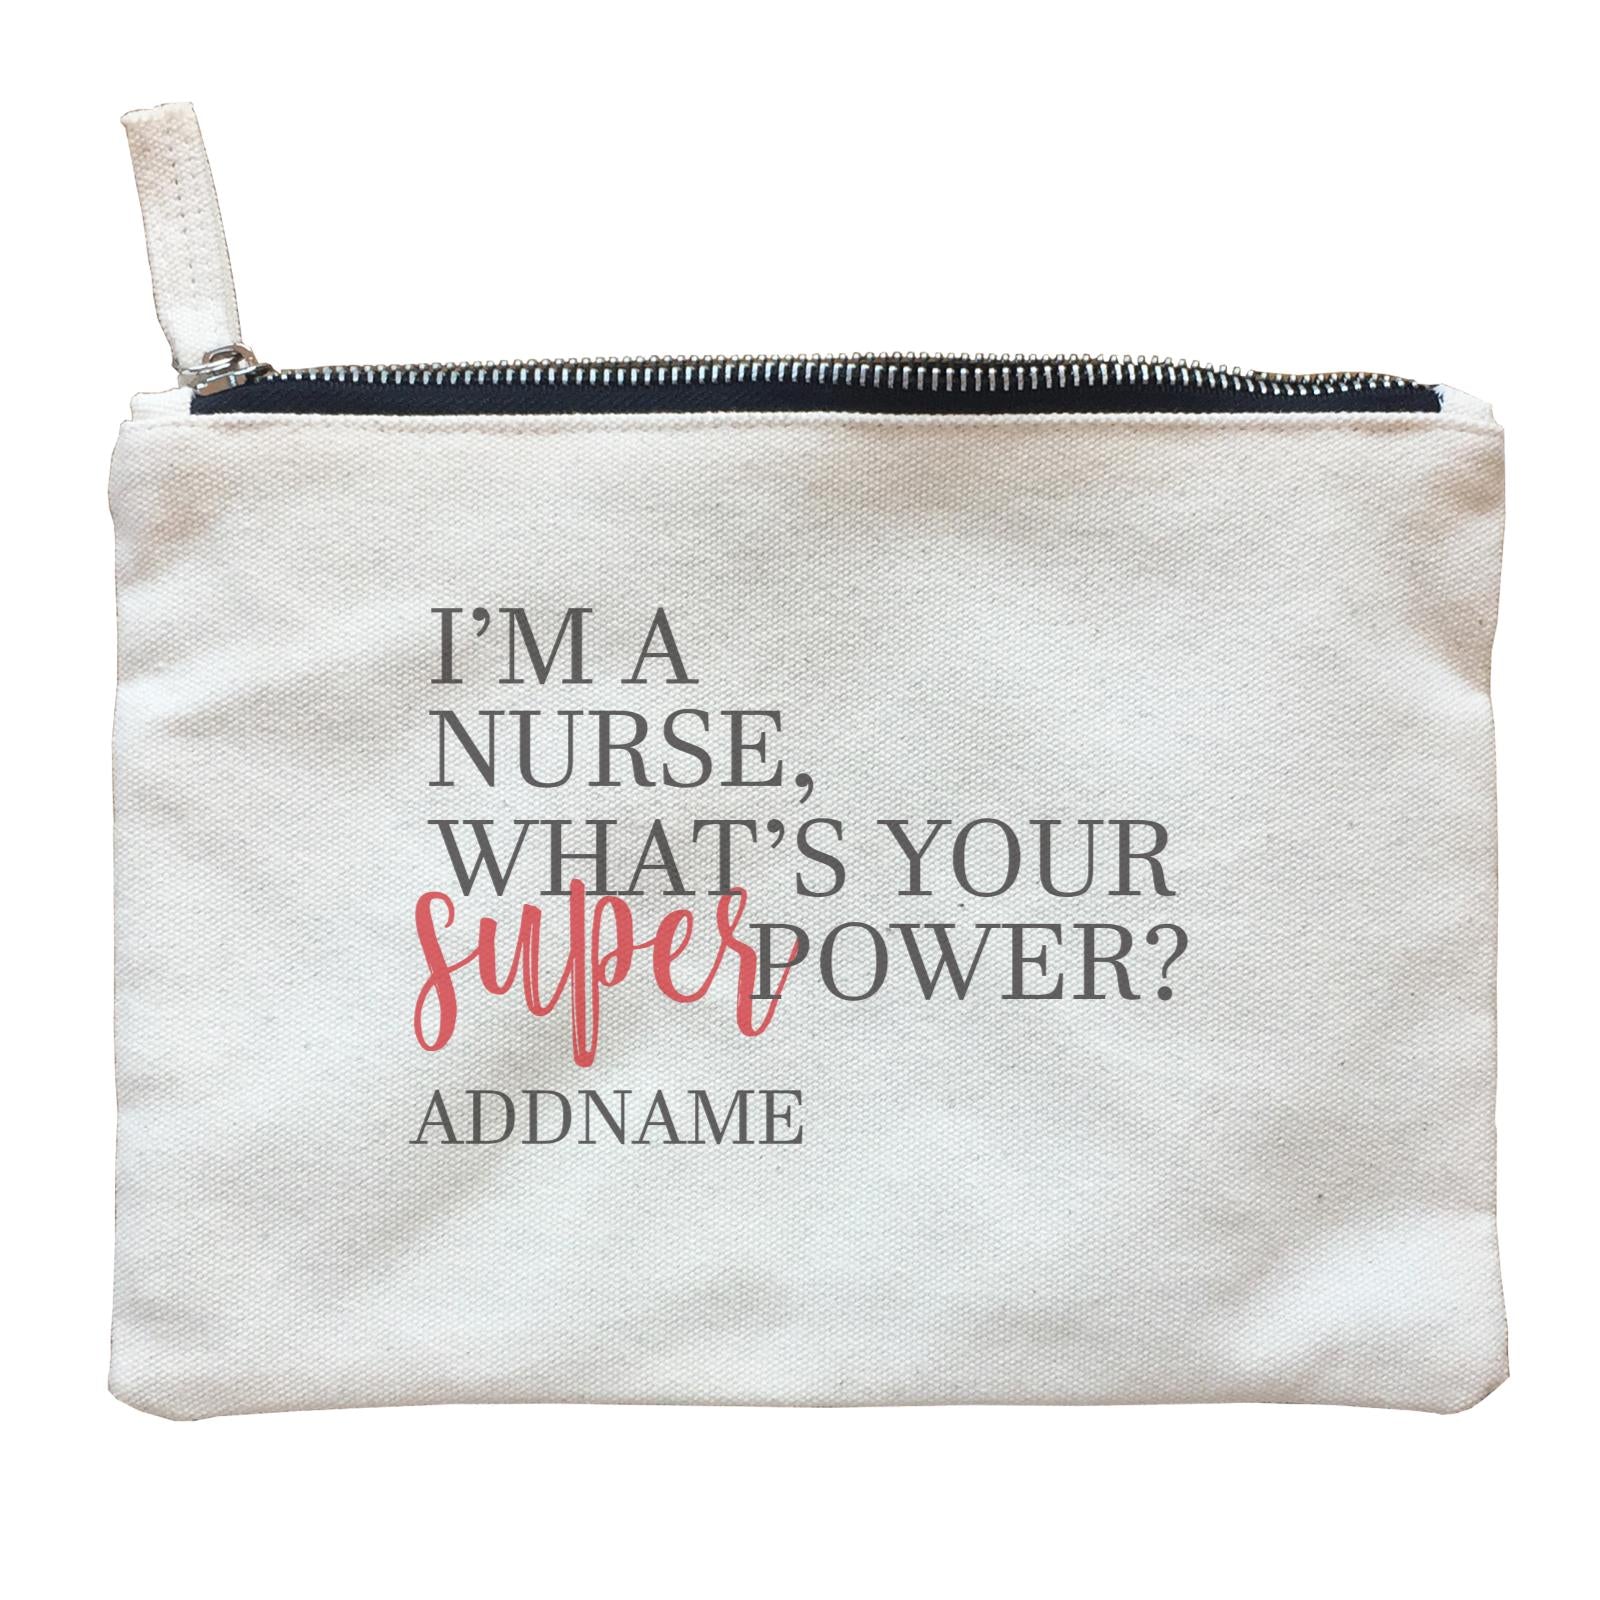 I'm A Nurse, What's Your Superpower Zipper Pouch